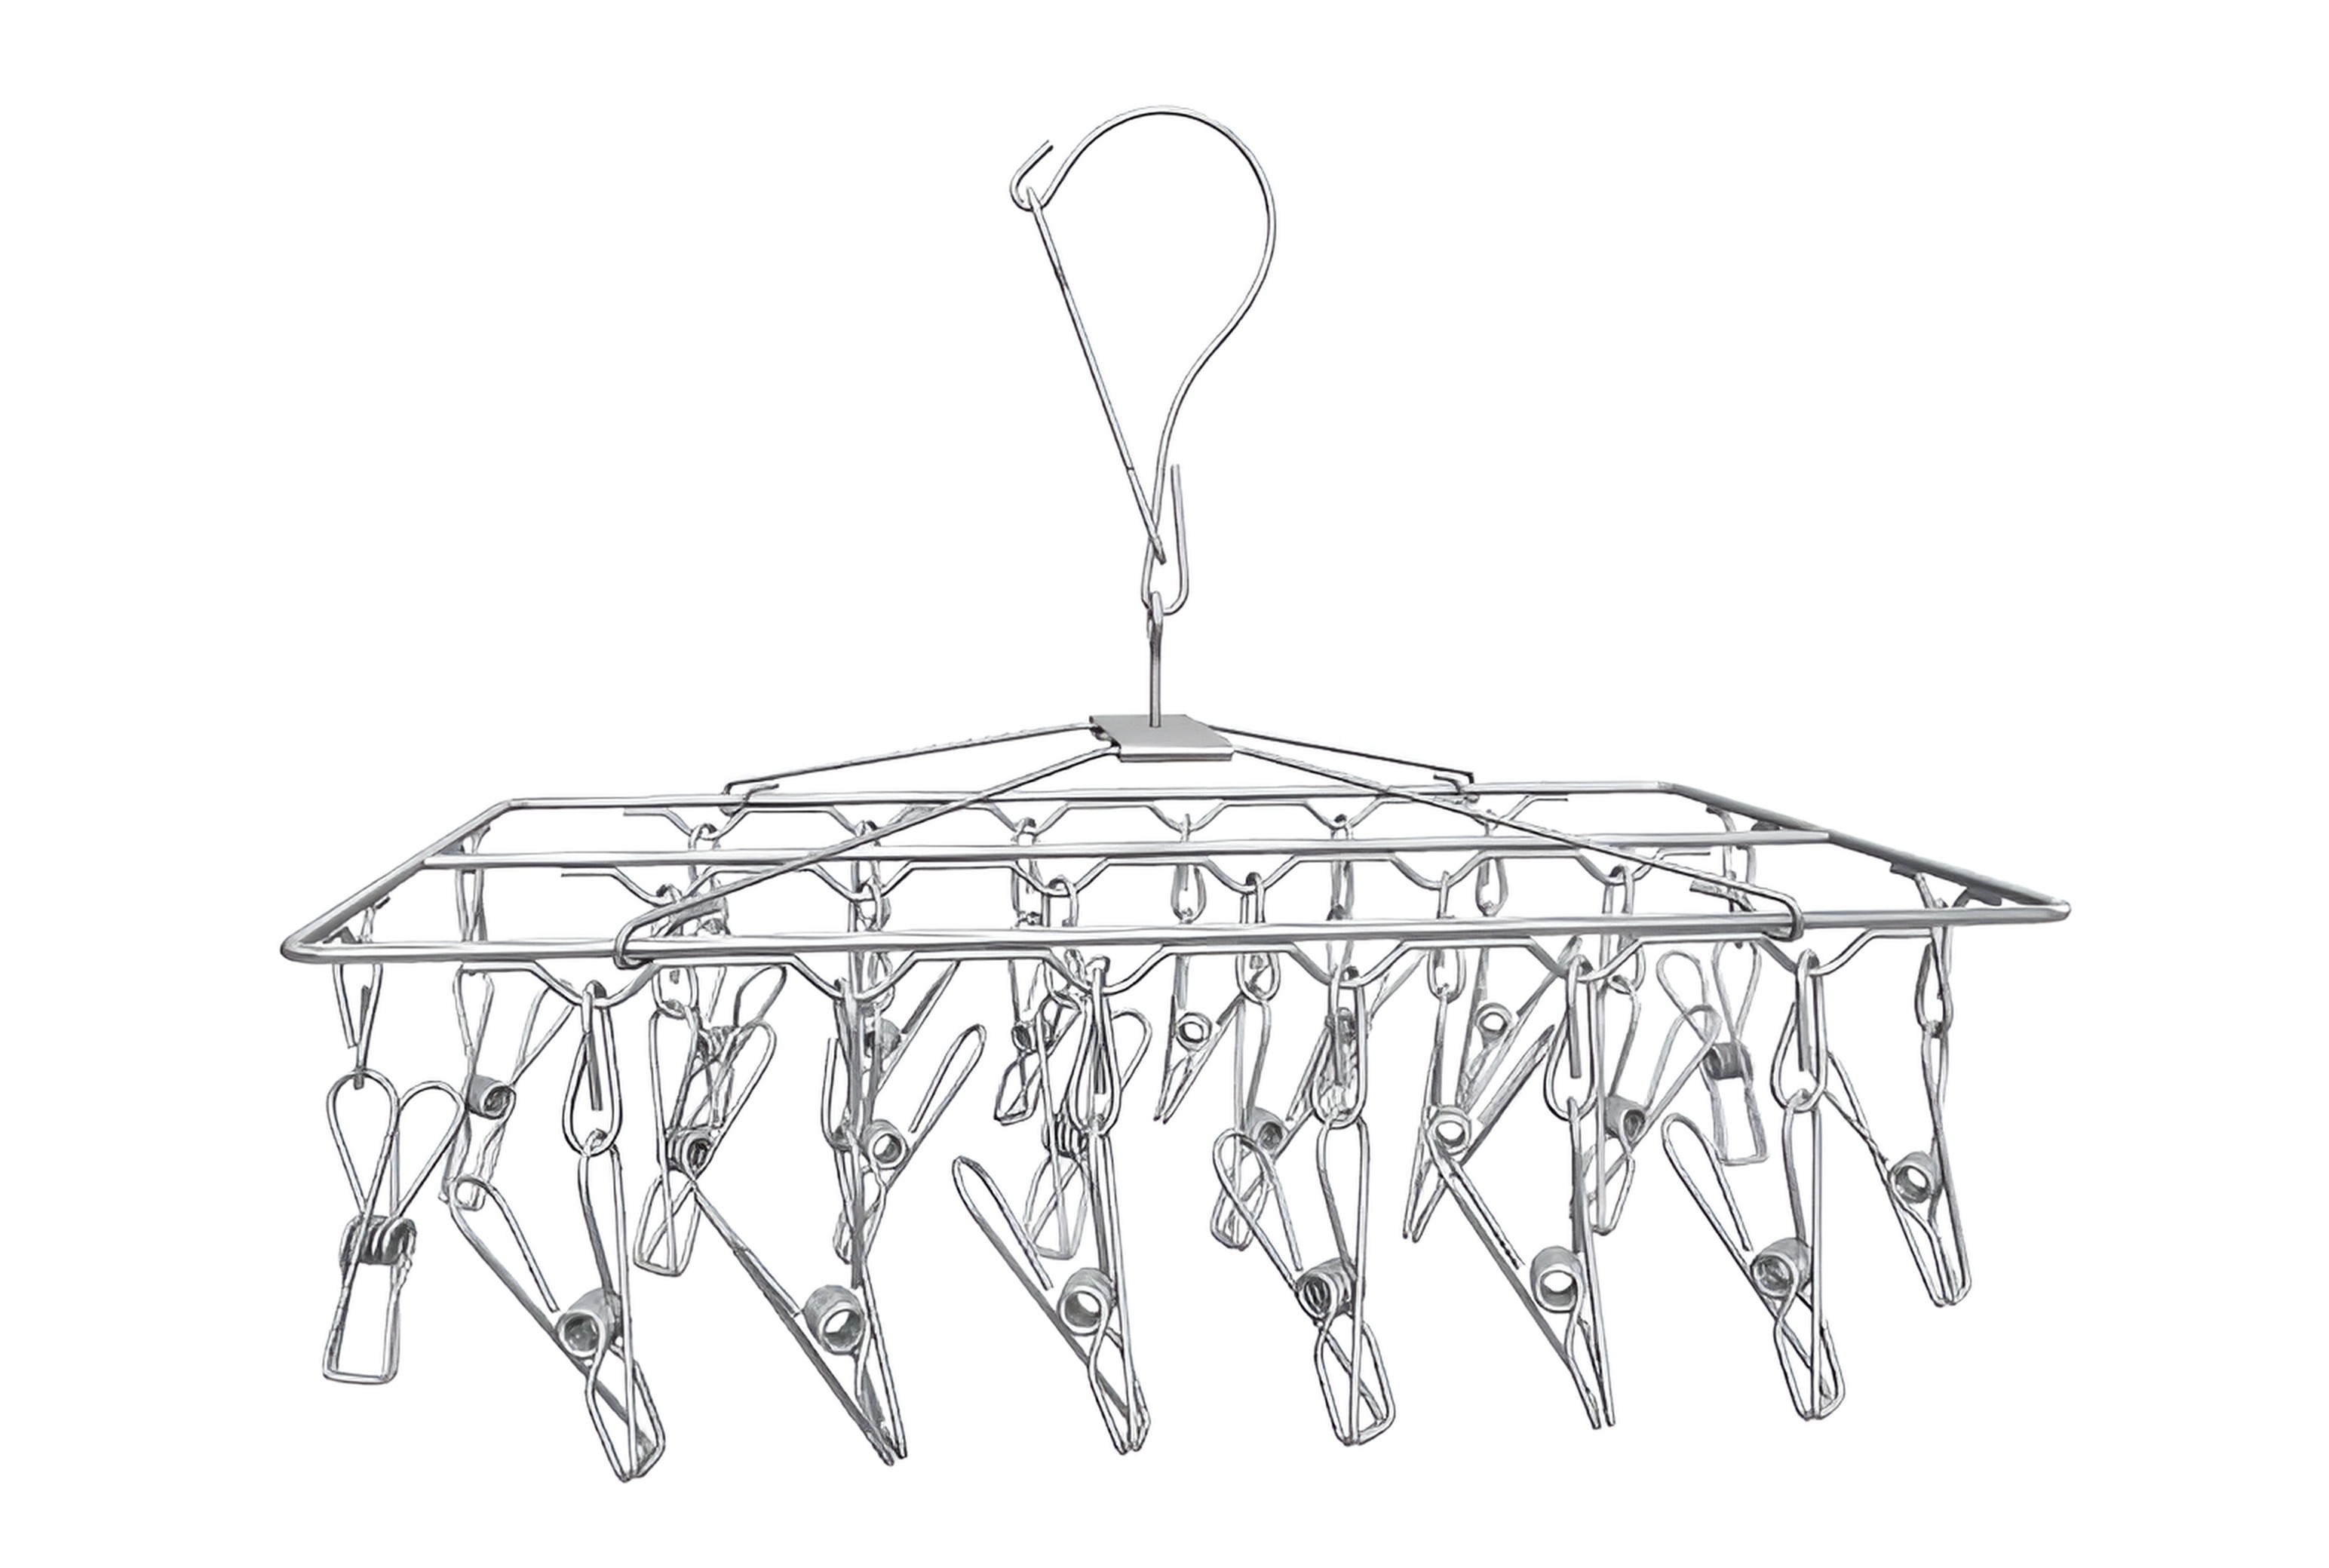 Keep Peg Stainless Steel Peg Airer and Sock Hanger Hang in Style: Design Features of the Sock Hanger